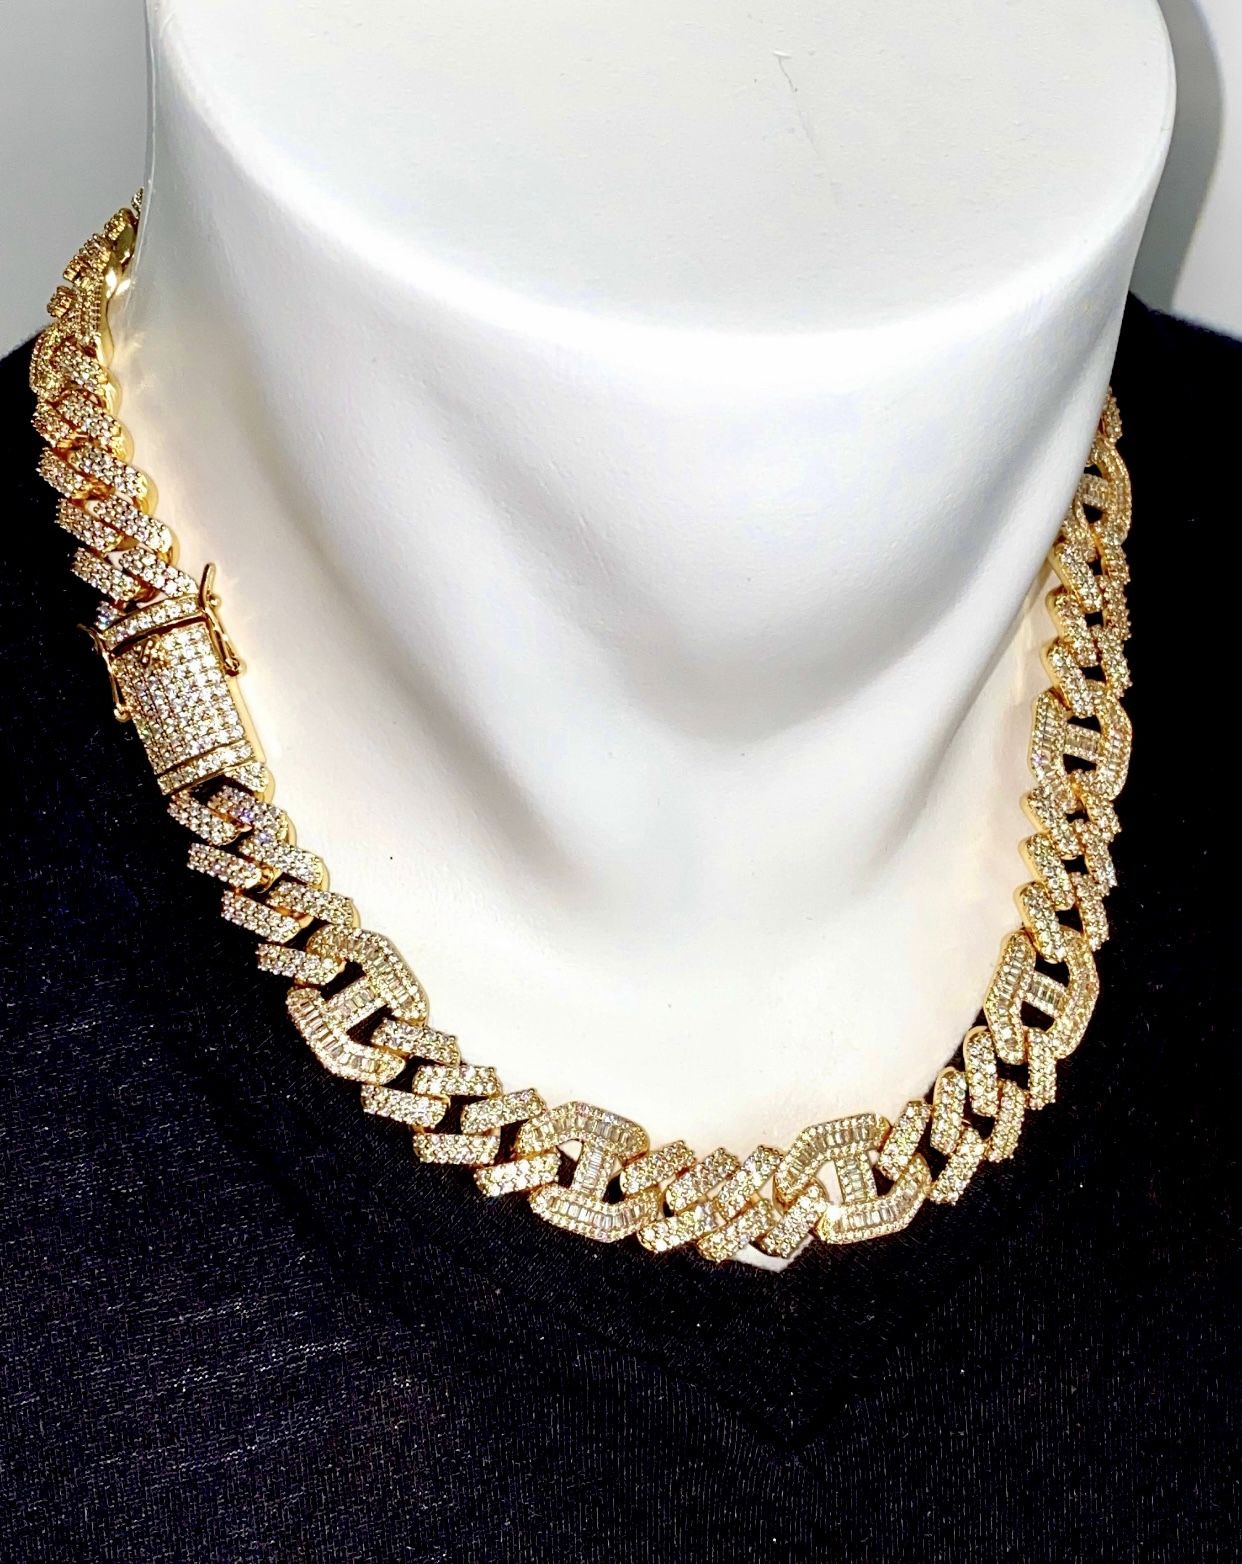 Men’s Designer Link Chain Necklace, 14K Gold 5X Layered Cuban Chain, Bling Necklace, CZ Diamond Choker, ICY Necklace, Chain